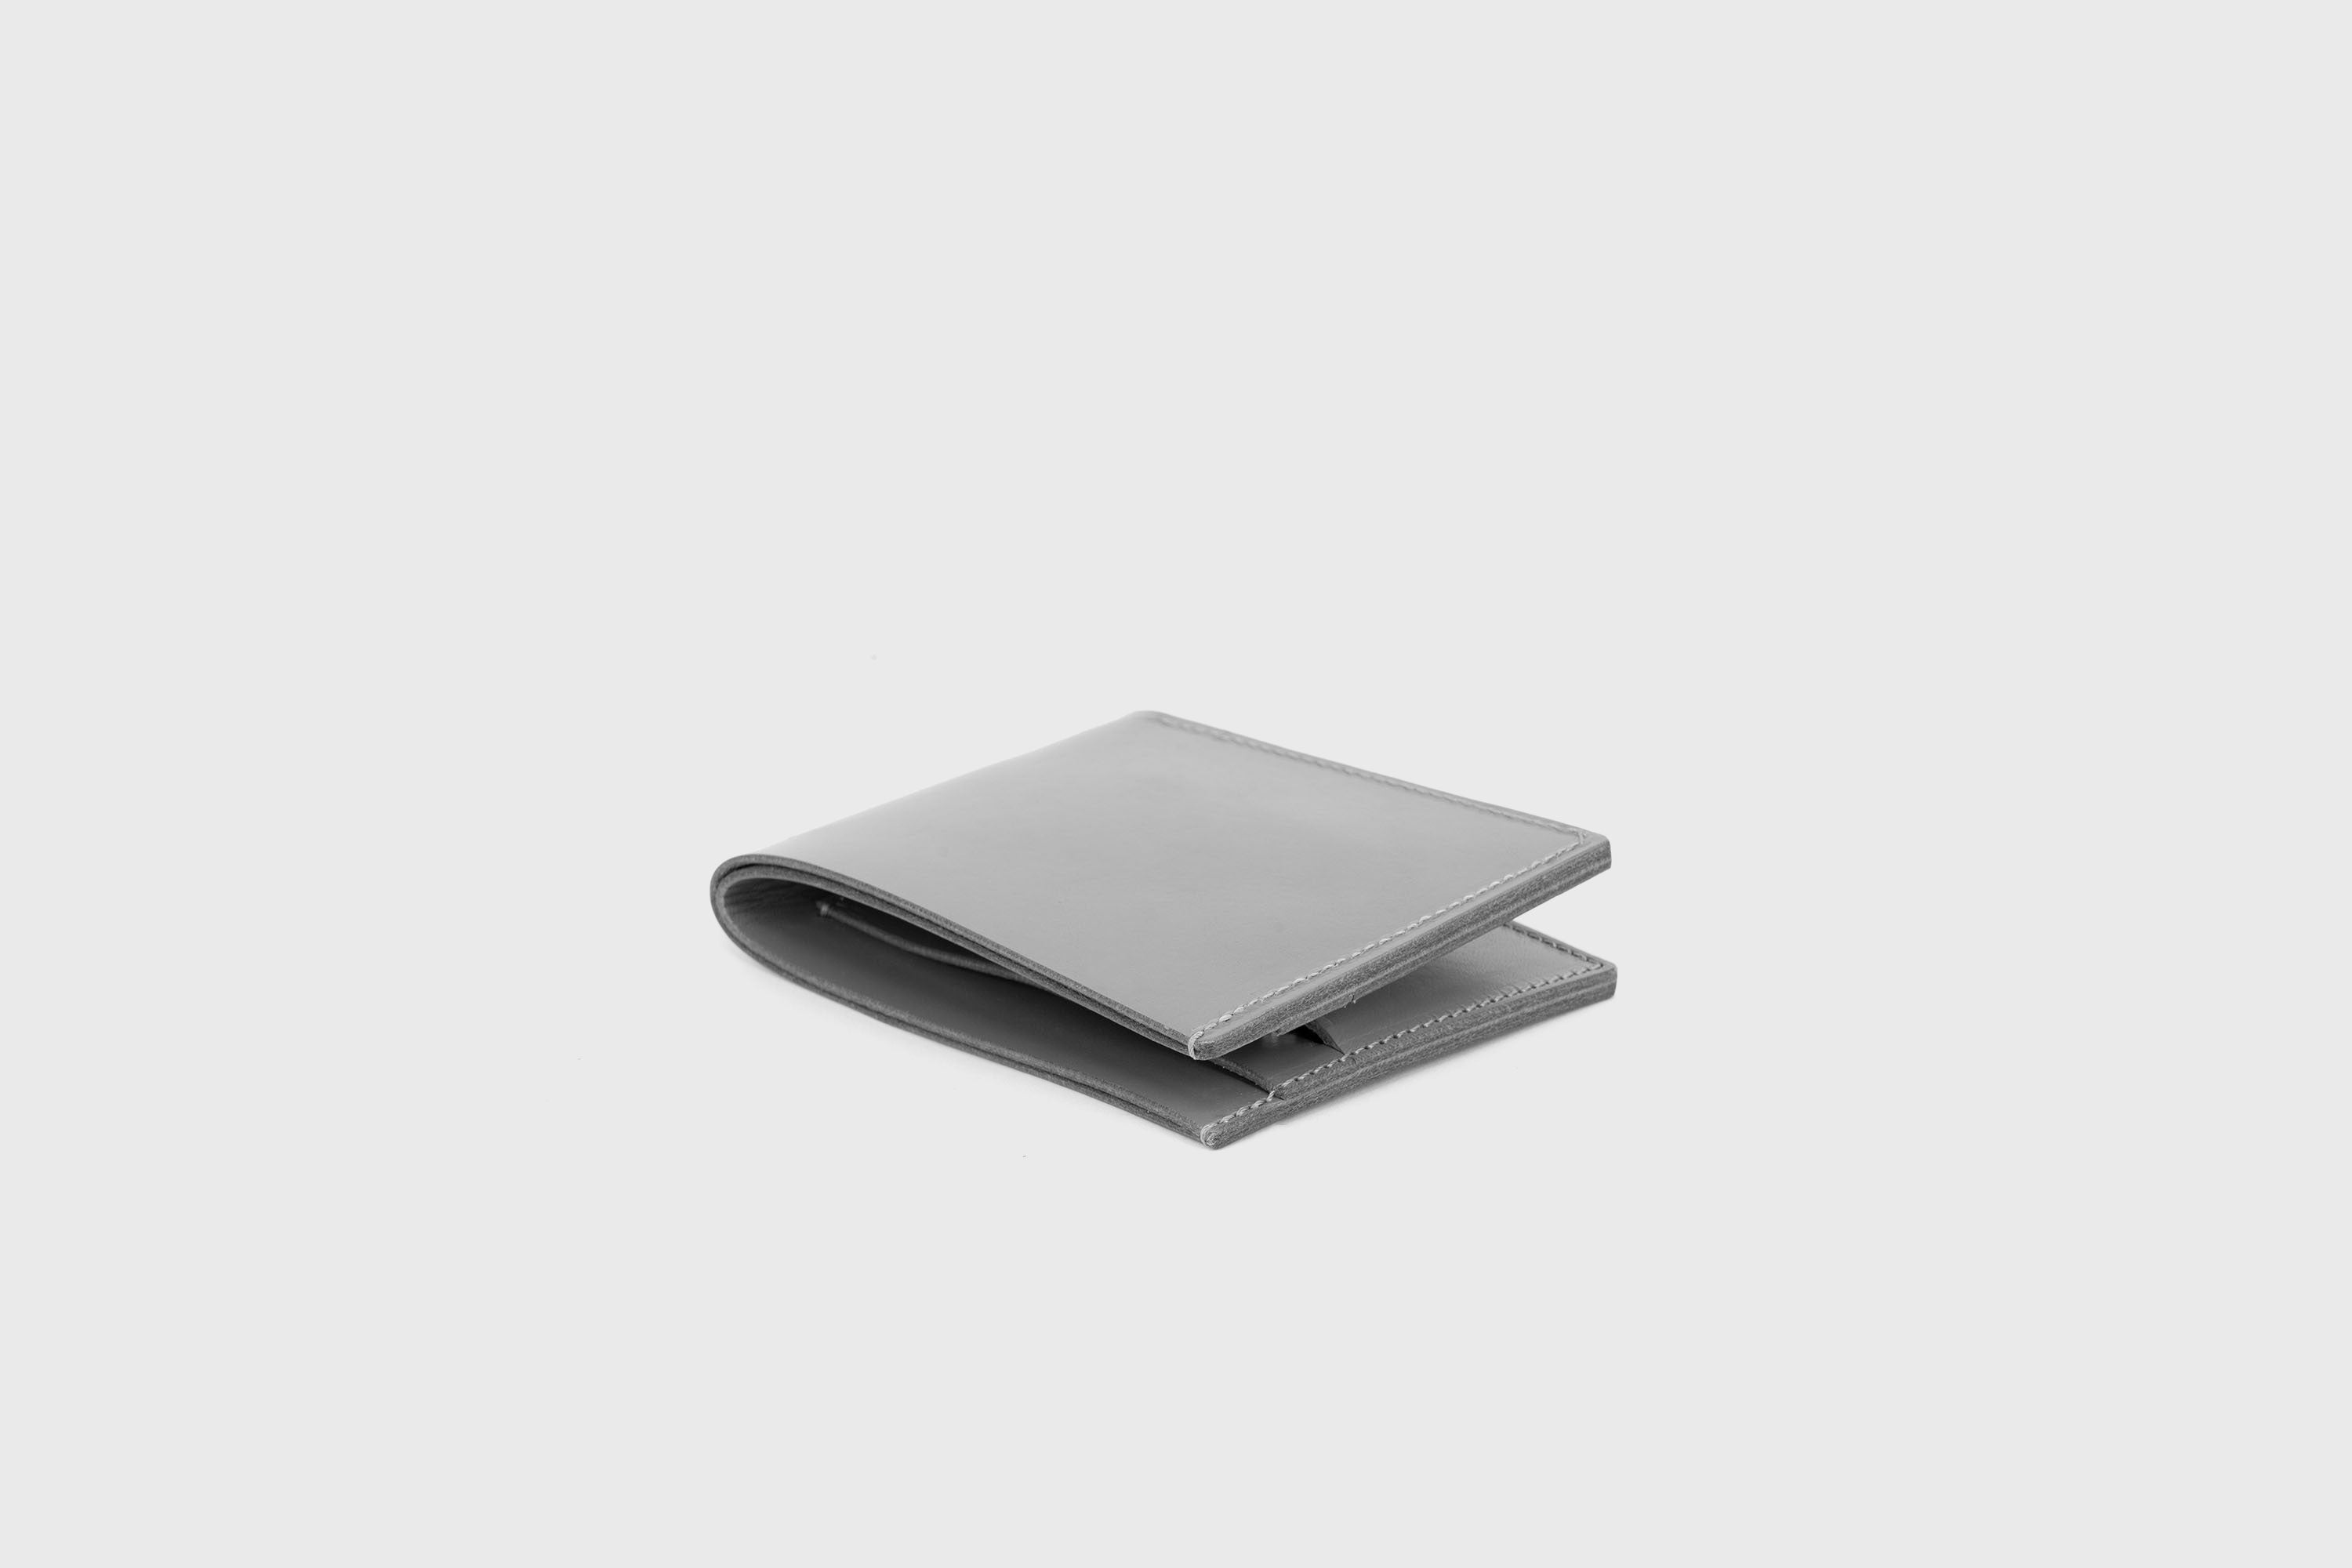 Bifold Wallet Light Grey Leather Vegetable Tanned Leather Premium Classic Design and Handcrafted By Atelier Madre Manuel Dreeesmann Barcelona Spain